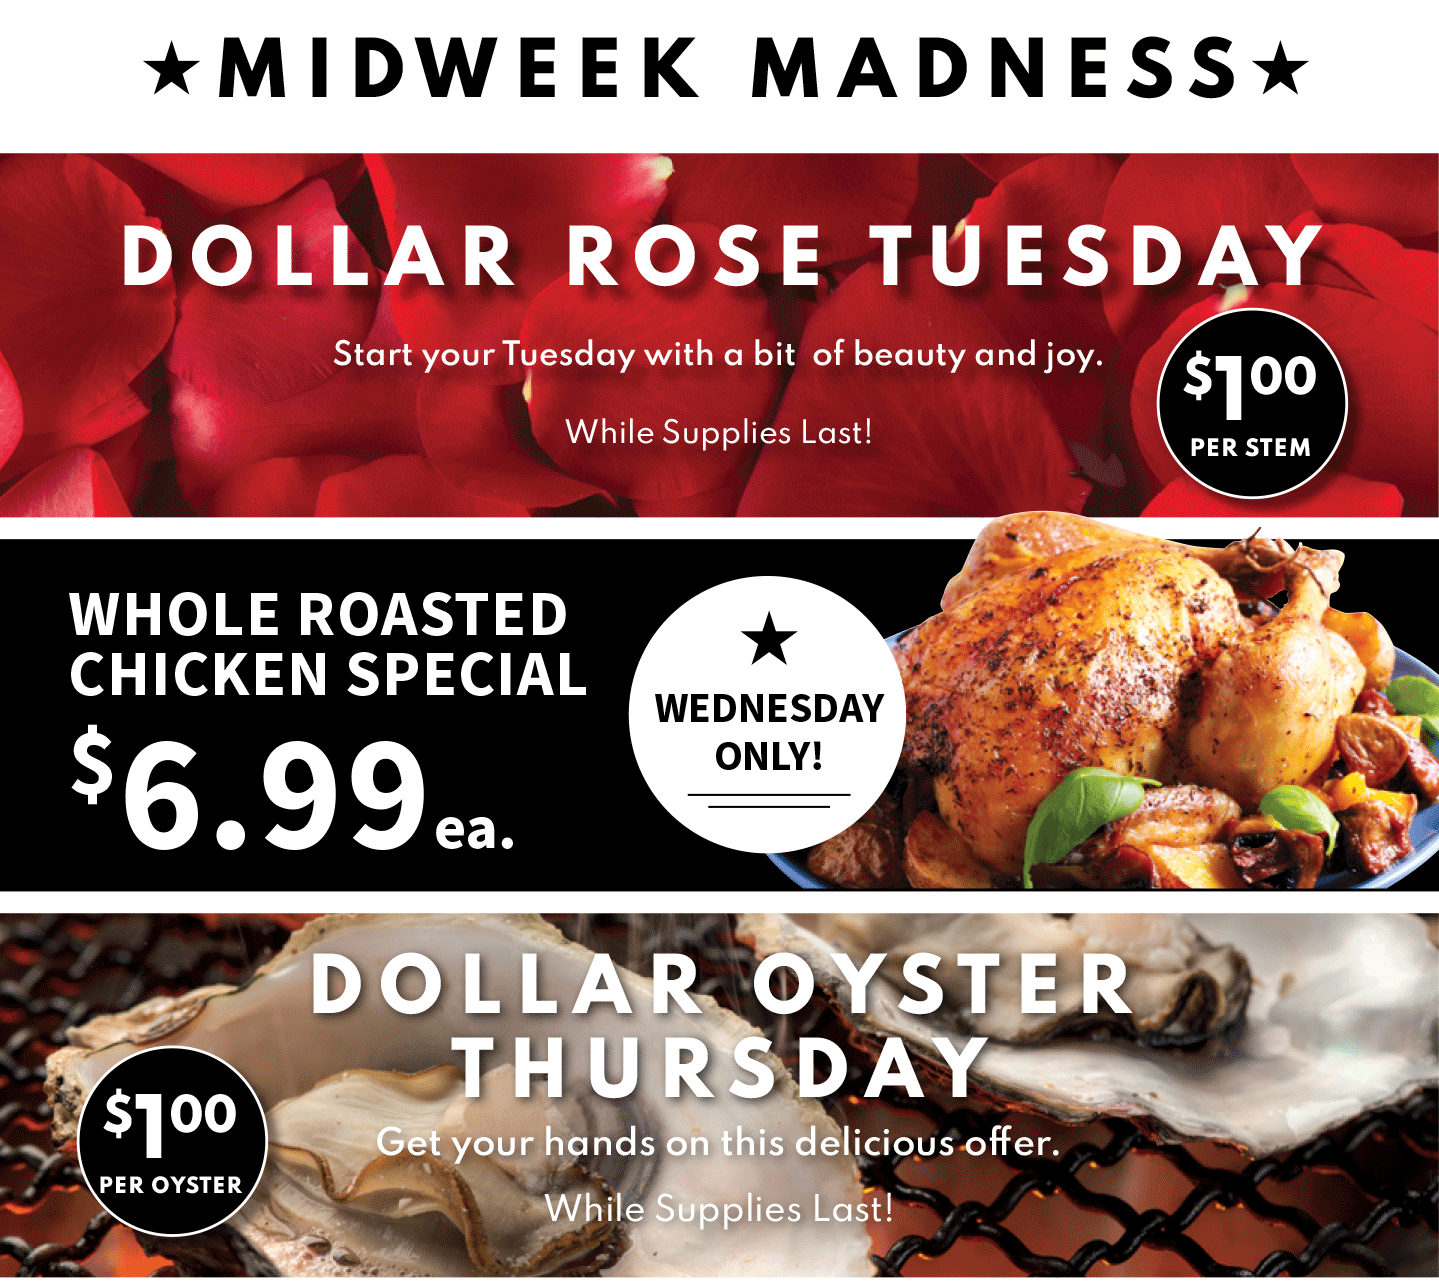 dollar rose tuesday, whole roasted chicken special $6.99 ea and Dollar Oyster Thur $1 per oyster